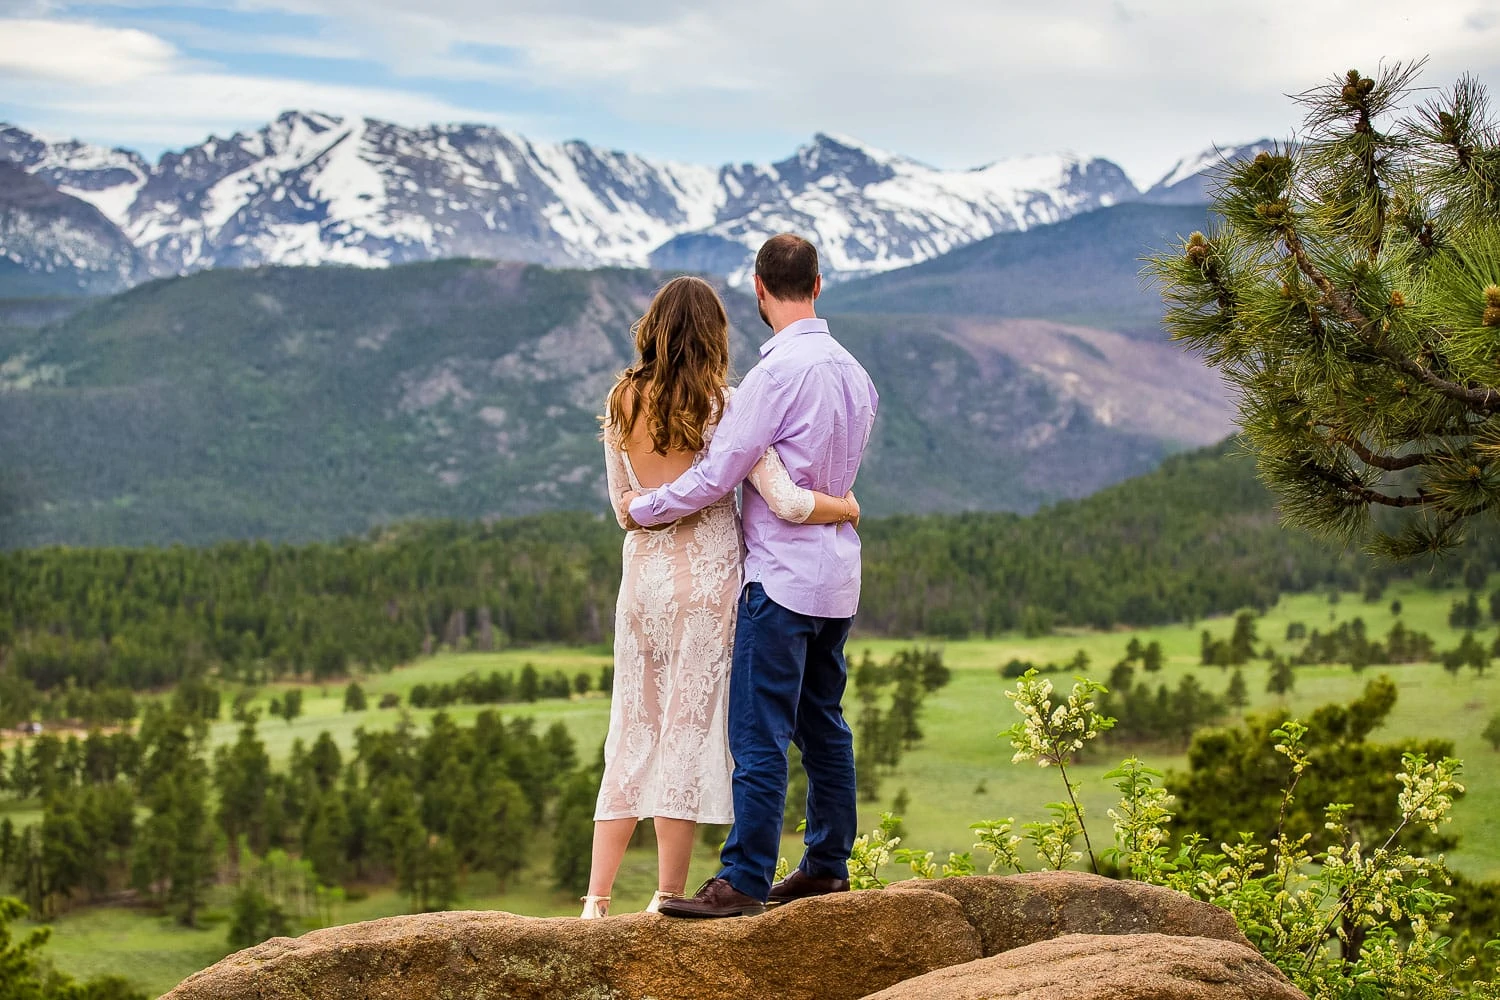 Engagement photos at 3m curve in rocky mountain national park.